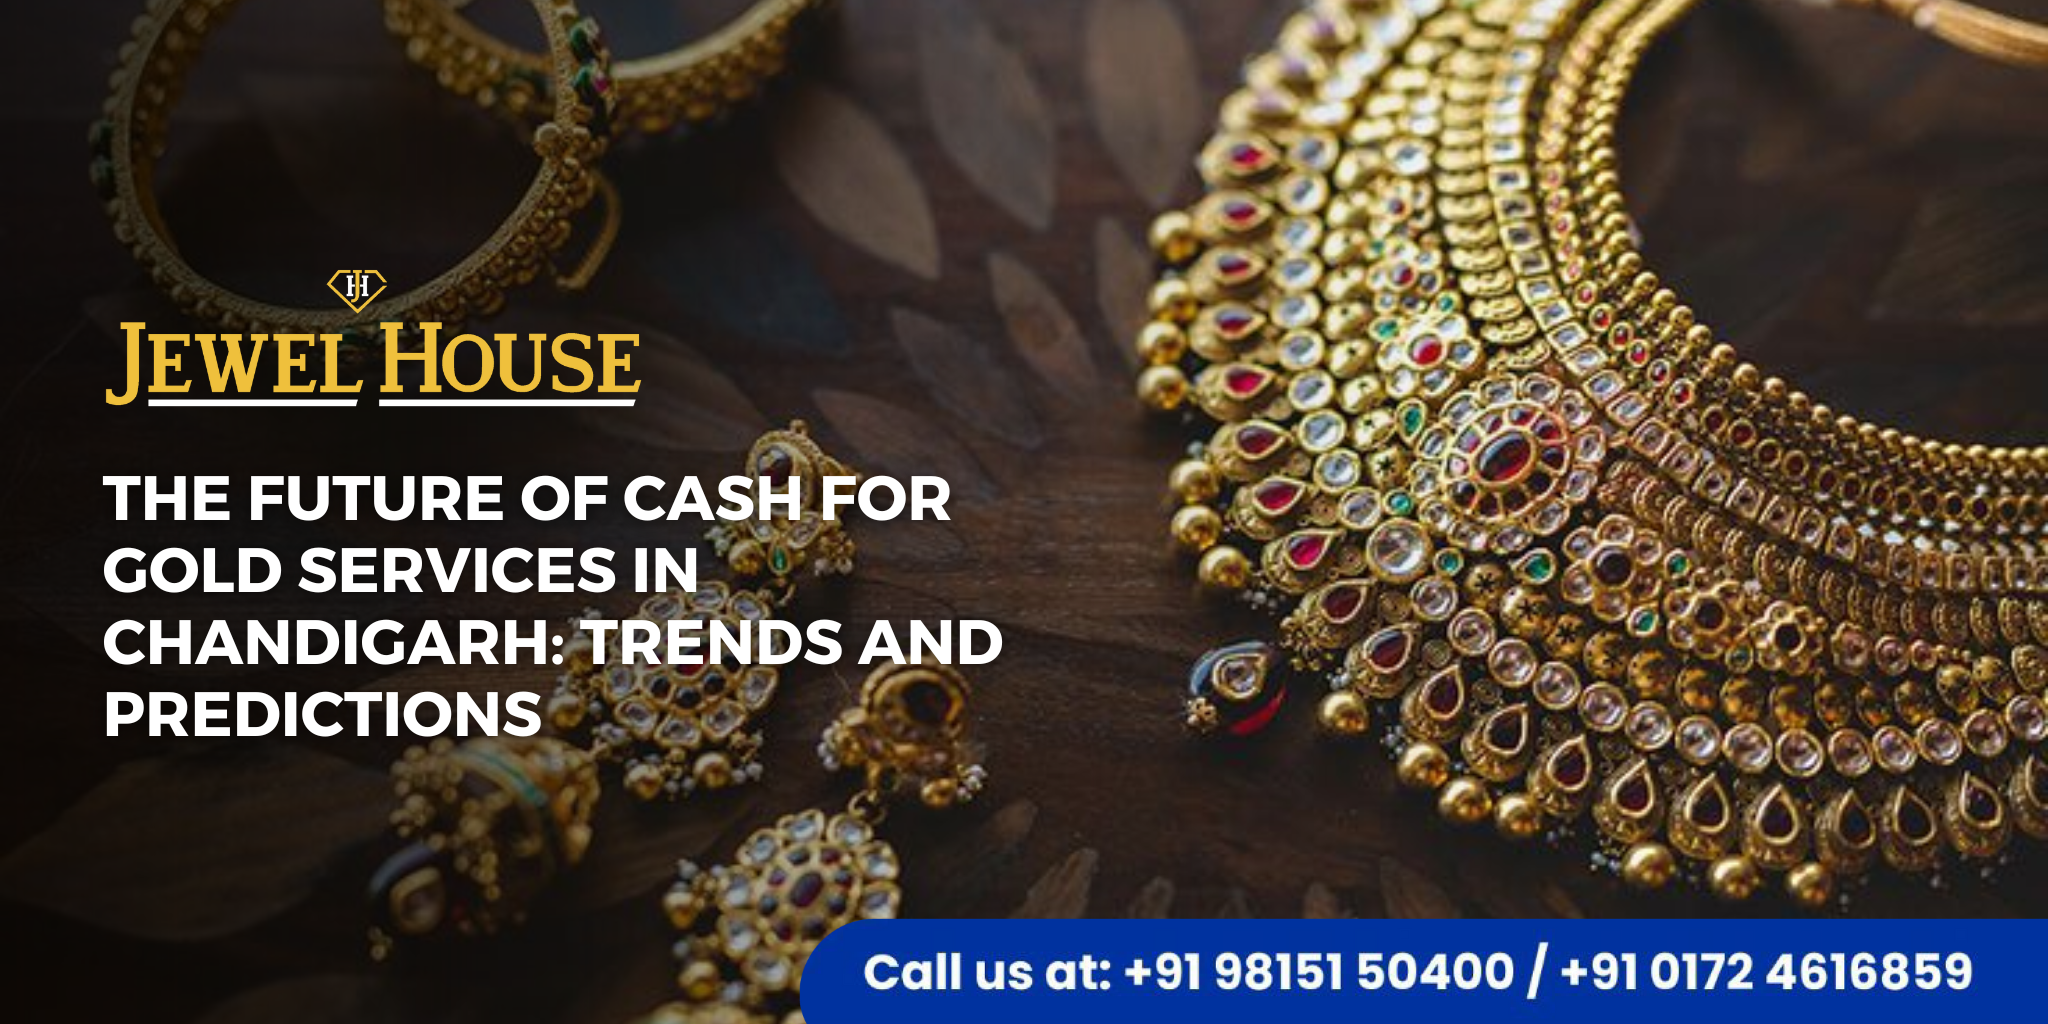 Cash for Gold Services in Chandigarh